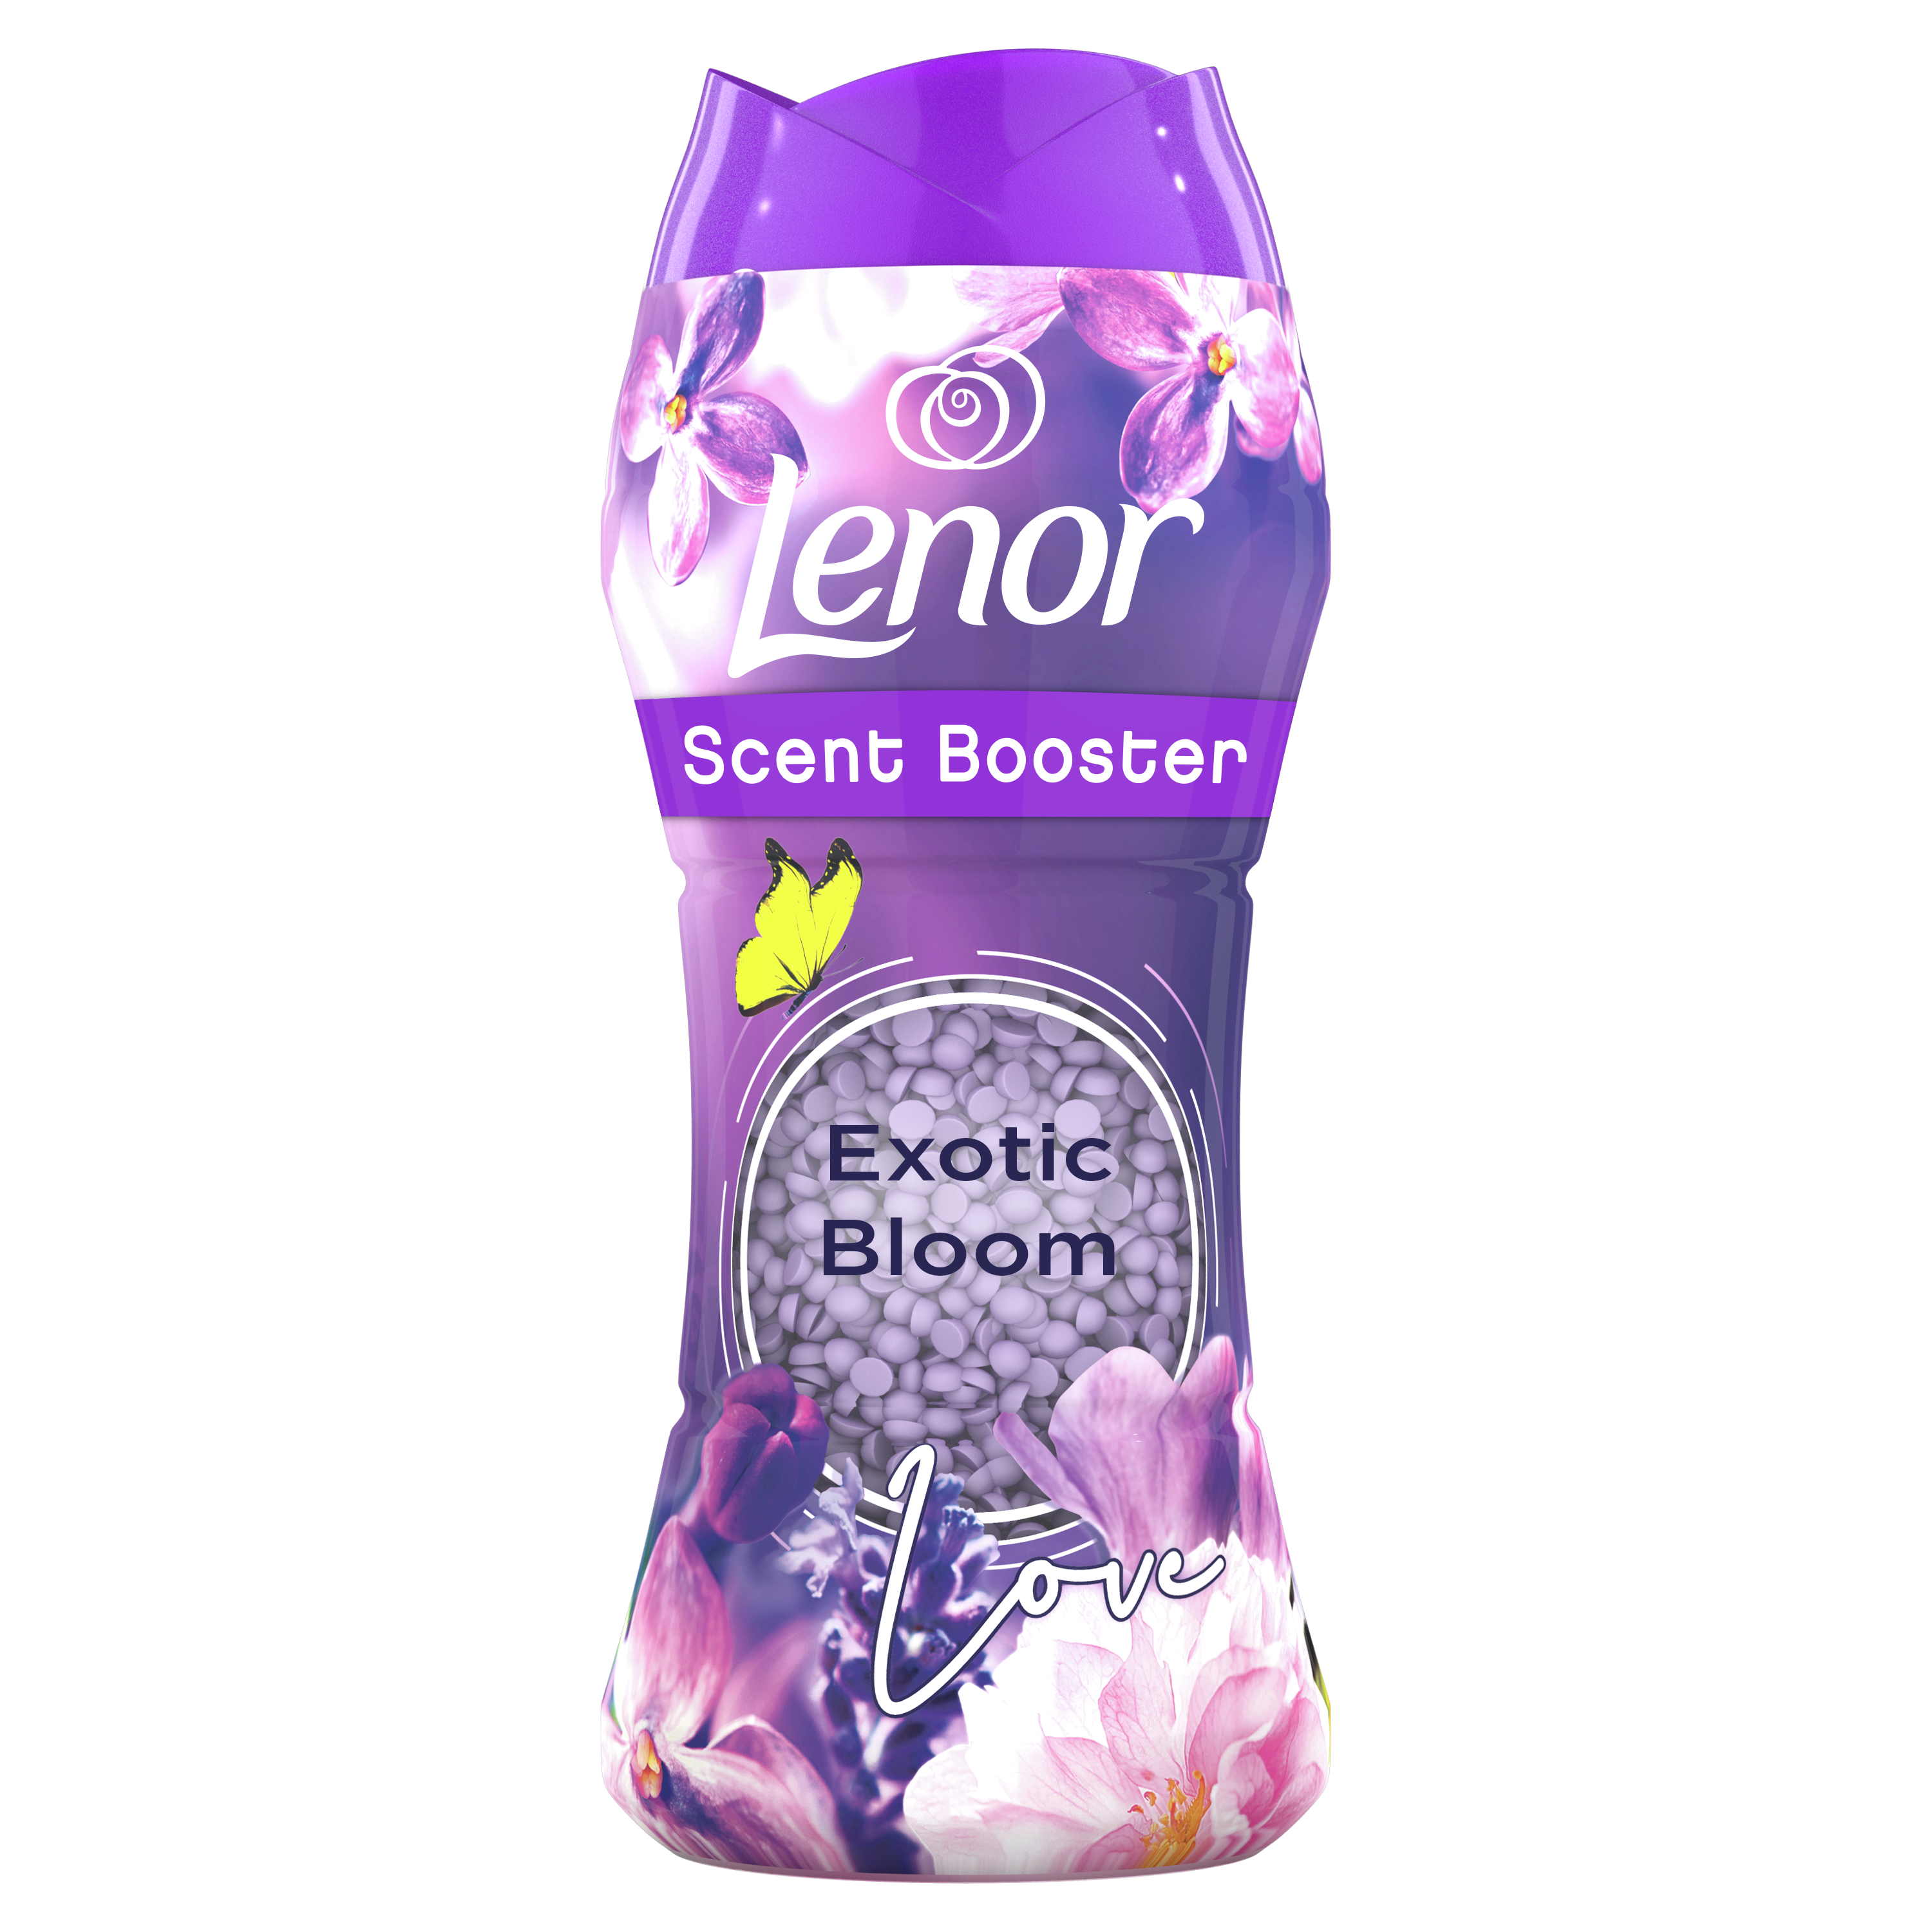 Lenor UK & Ireland - Introducing Uplift, the new scent from Lenor  Unstoppables in-wash scent booster for up to 12 weeks of boosted freshness*